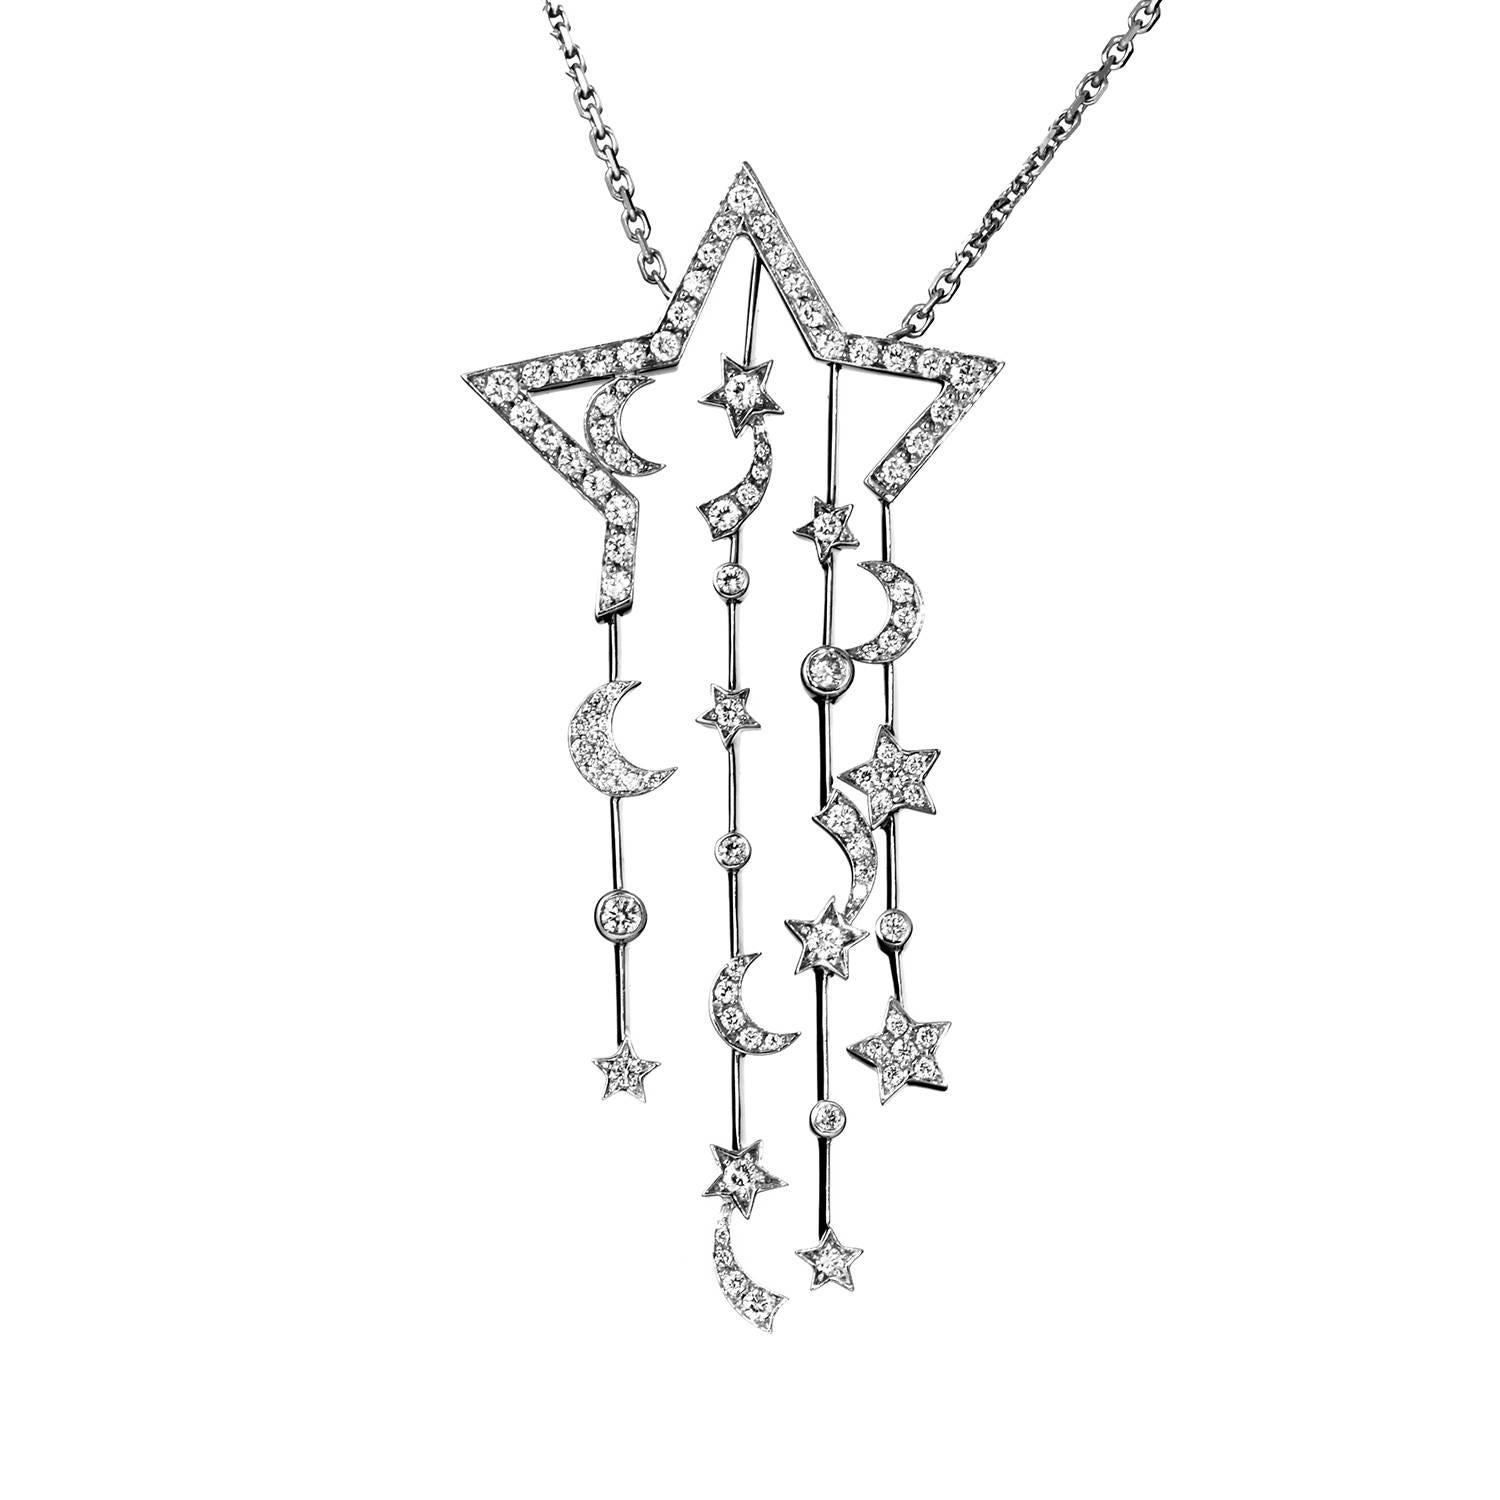 Featuring brand’s famous design inspired by the beauty and mystery of celestial objects, this extraordinary Chanel necklace is made of 18K white gold and boasts a pendant comprised of exceptionally designed half moons and stars, all set with